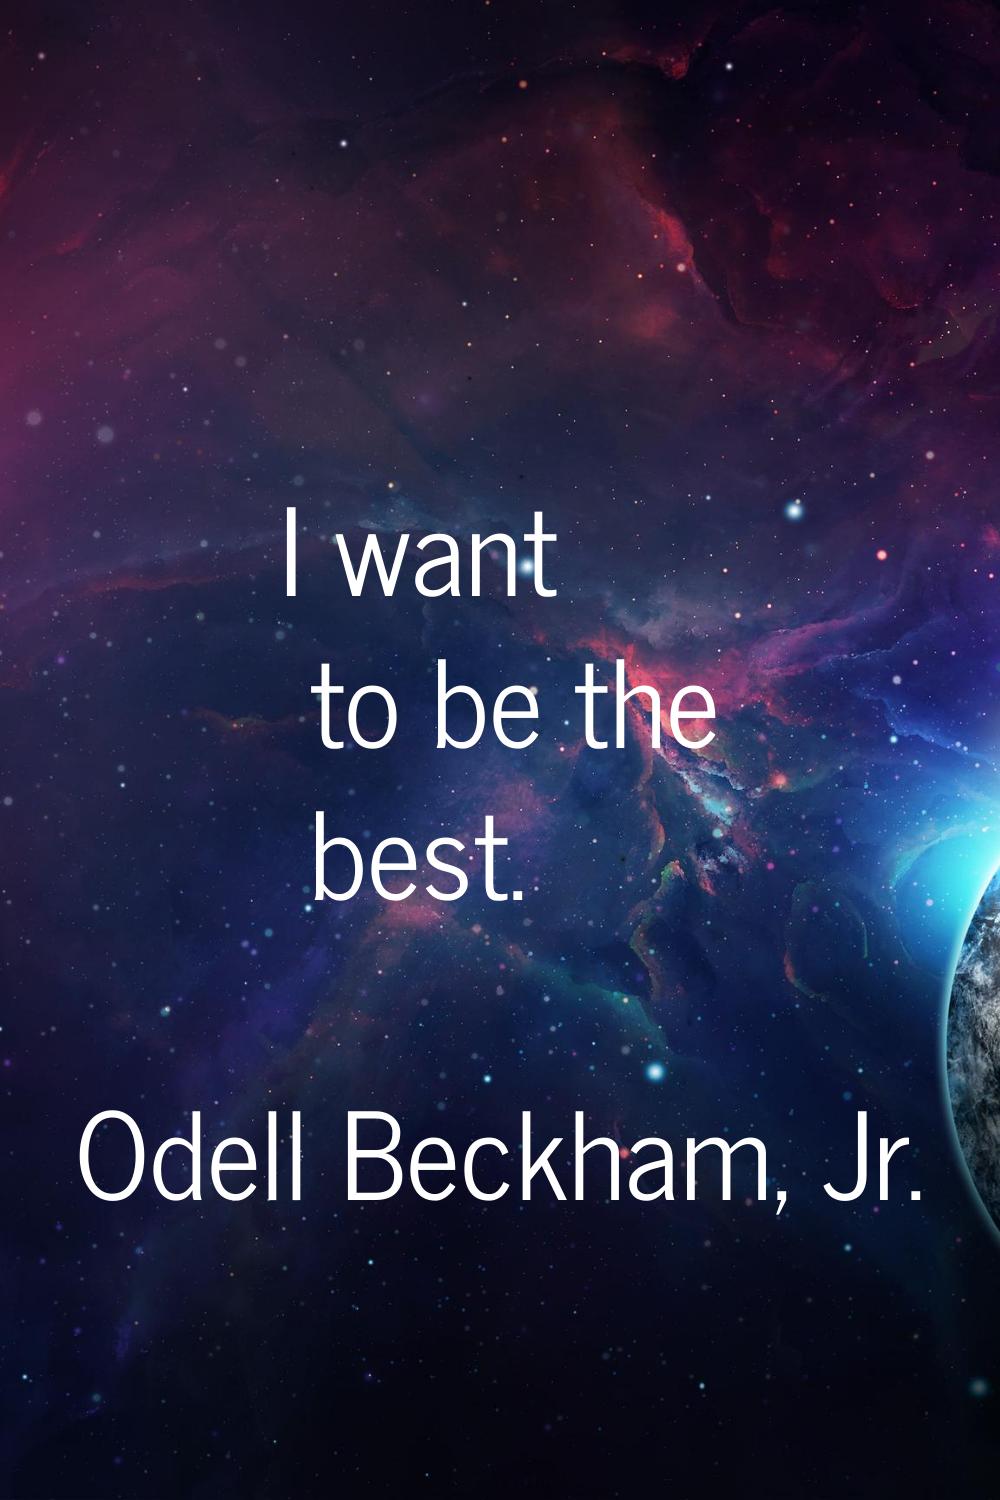 I want to be the best.